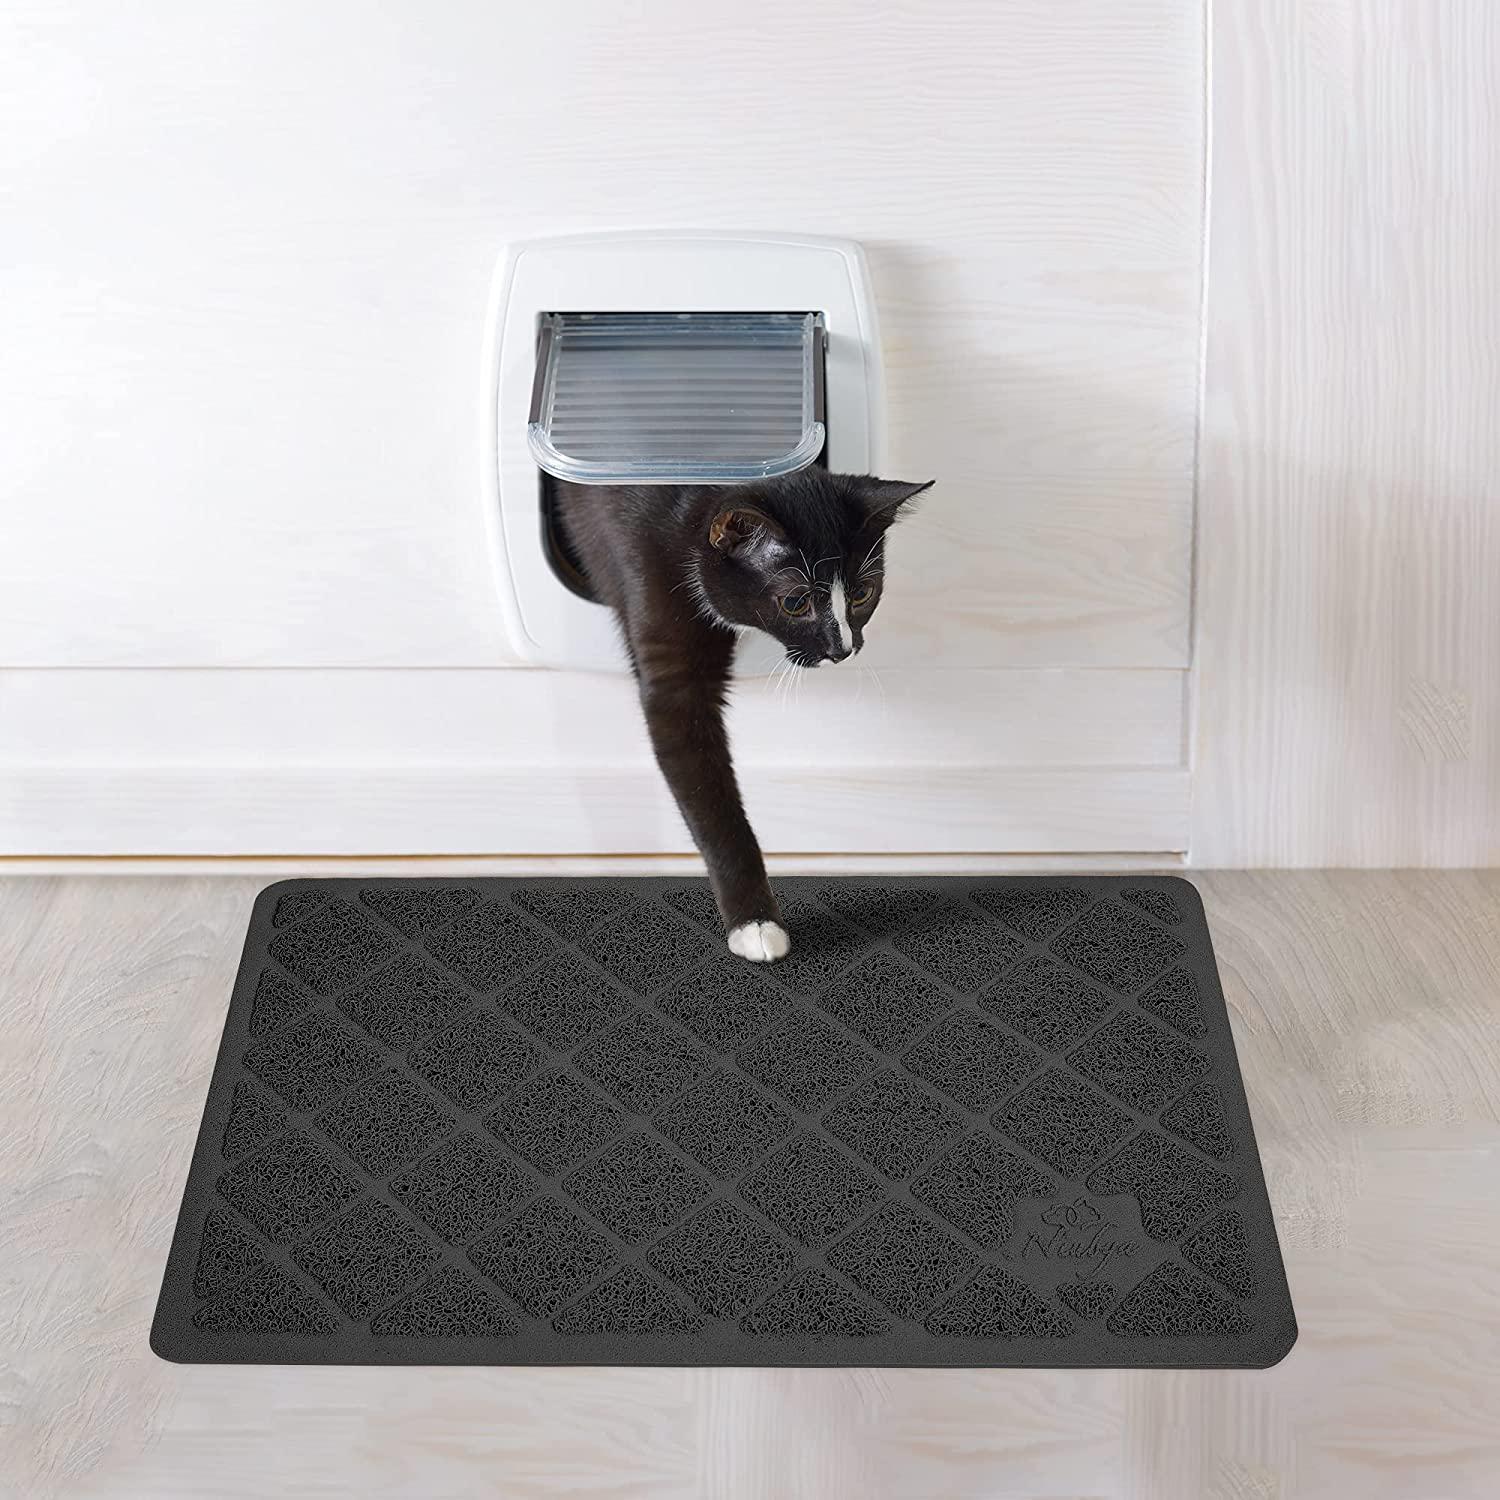 XL Large Cat Litter BoxMat Pad Pet Kitty Clean Easy Cleaning Floor